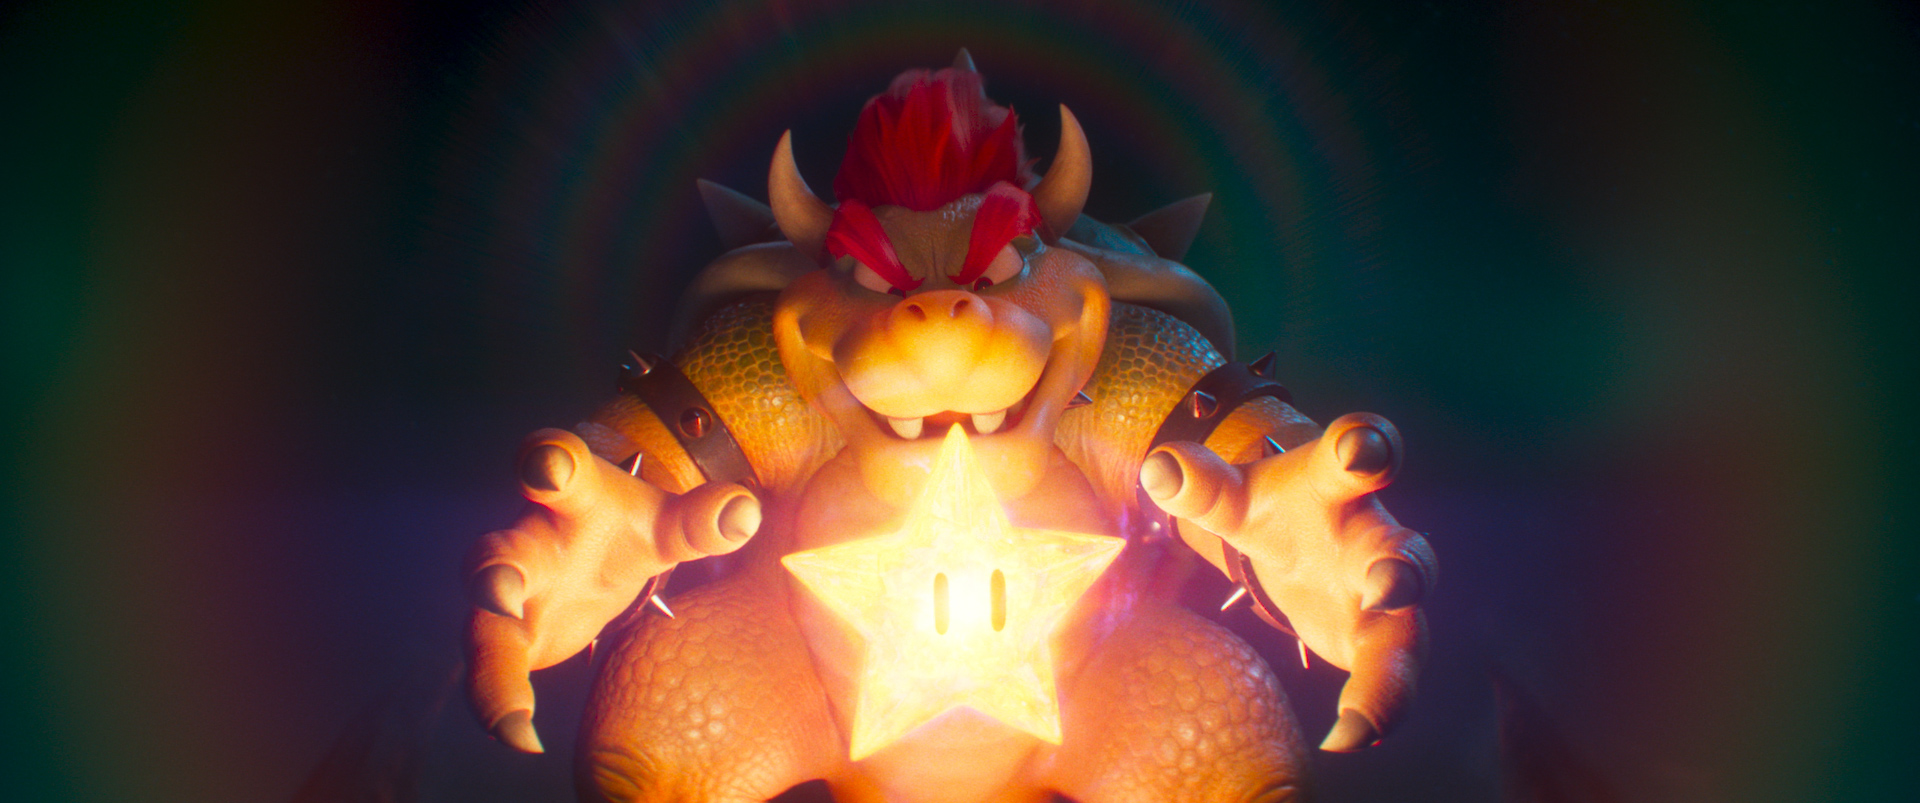 Bowser standing in darkness holding his arms out in front of him with a Super Star floating between his hands, in the CG-animated Super Mario Bros. Movie